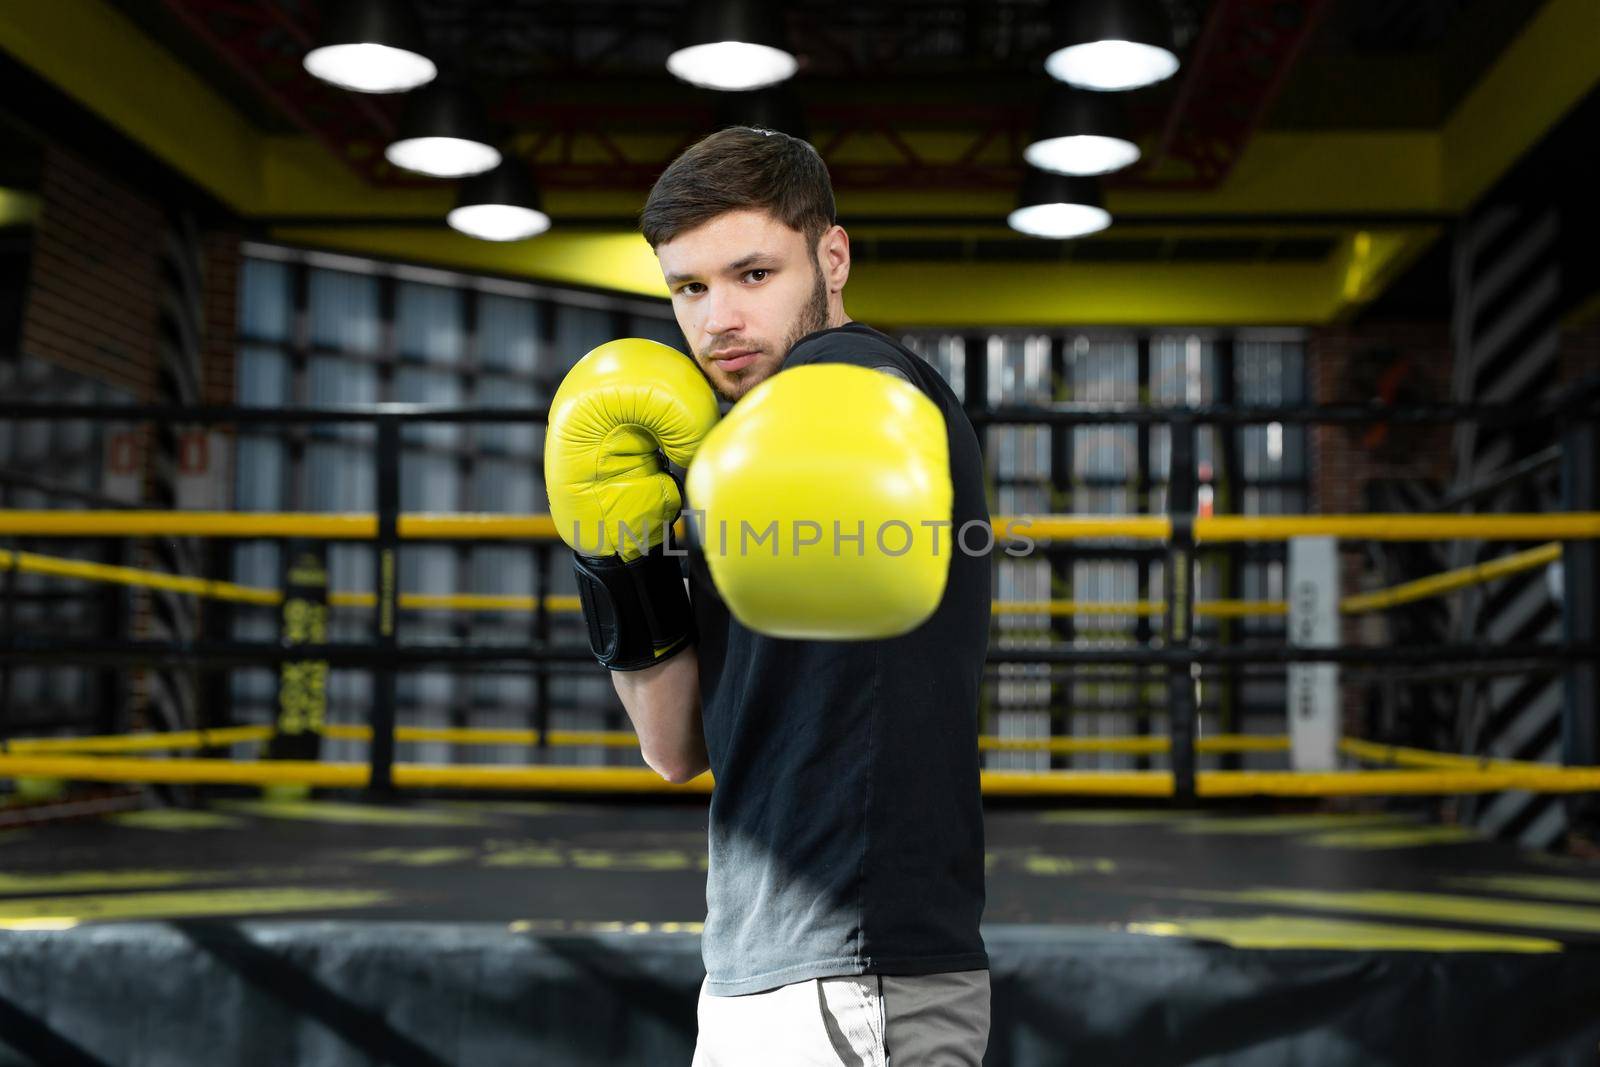 The assembled athlete in the boxing gym practices boxing punches during training and looks at the camera. by StudioPeace